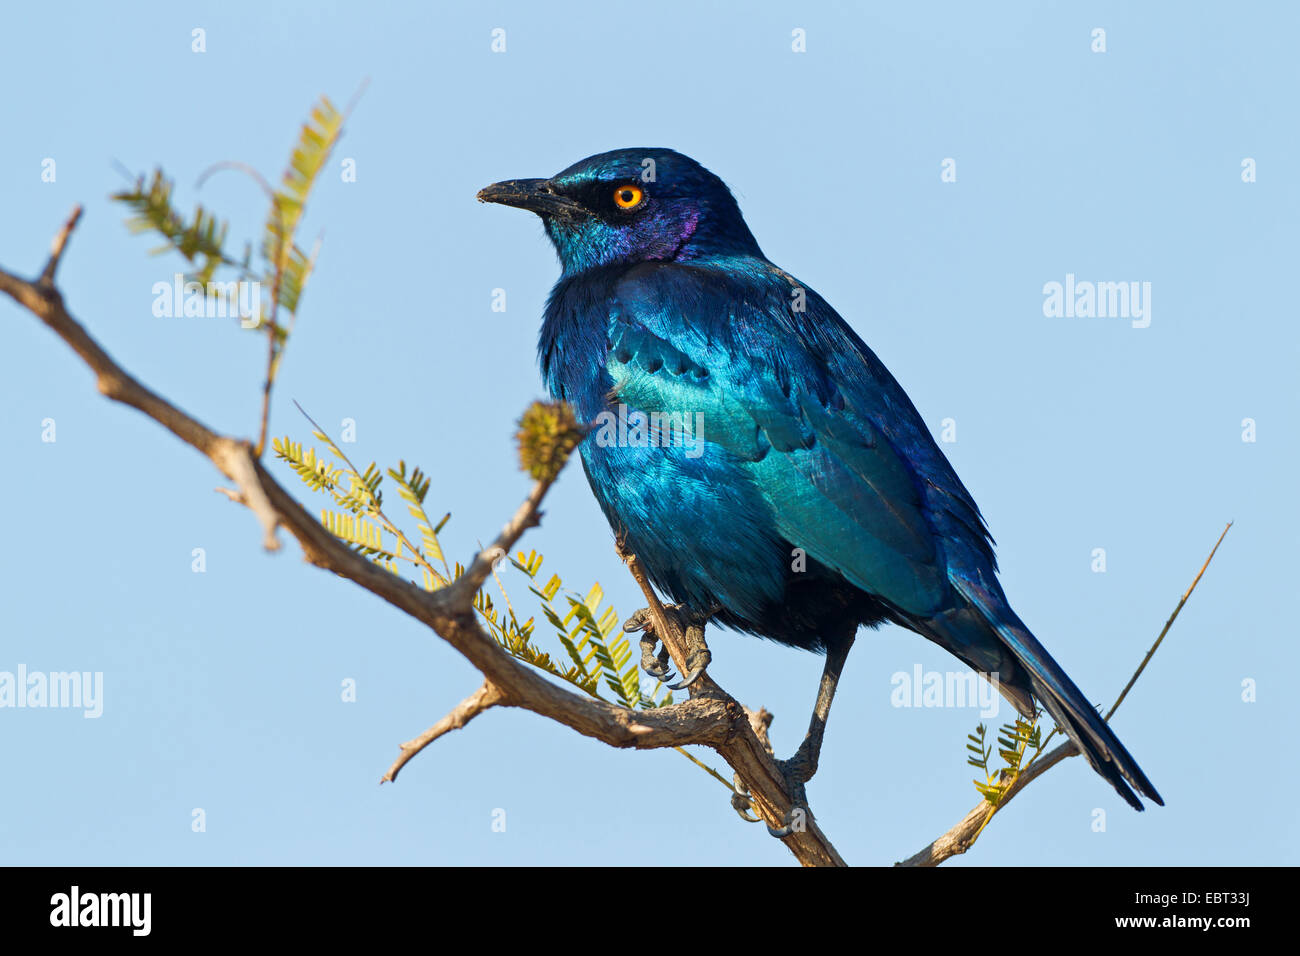 red-shouldered glossy starling (Lamprotornis nitens), sitting on a branch, South Africa, Krueger National Park, Lower Sabie Camp Stock Photo